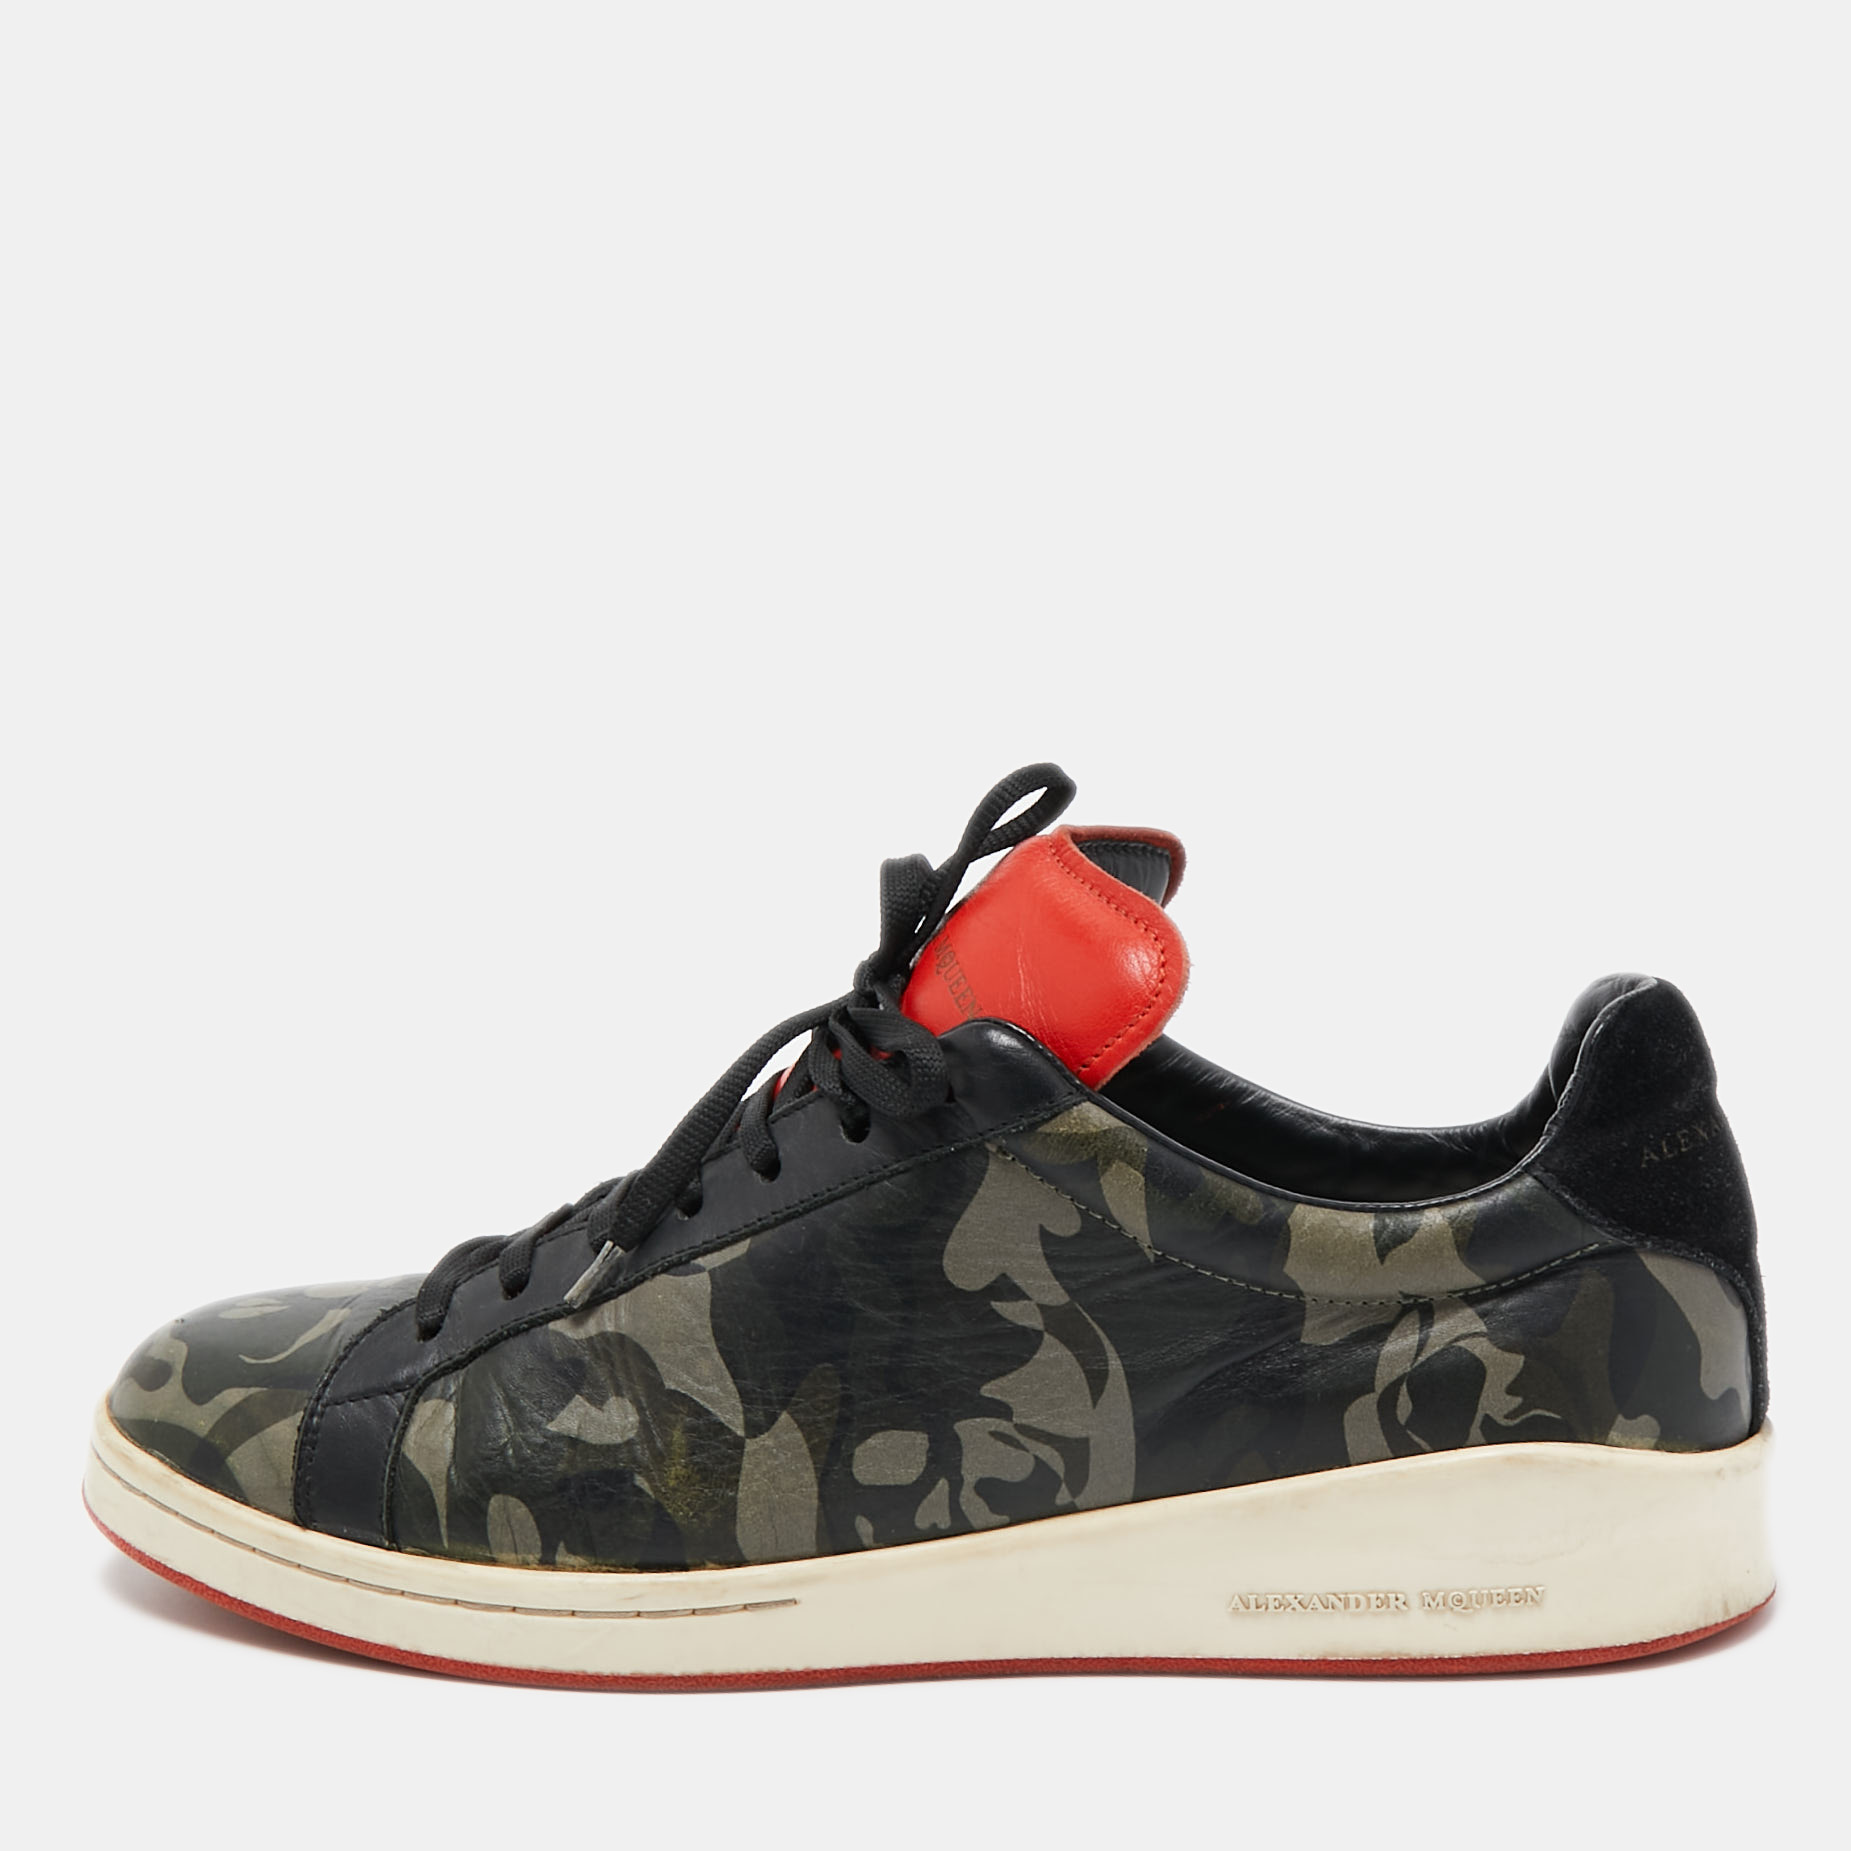 Alexander MQueen Black/Red Camo Print Leather Low Top Sneakers Size 43